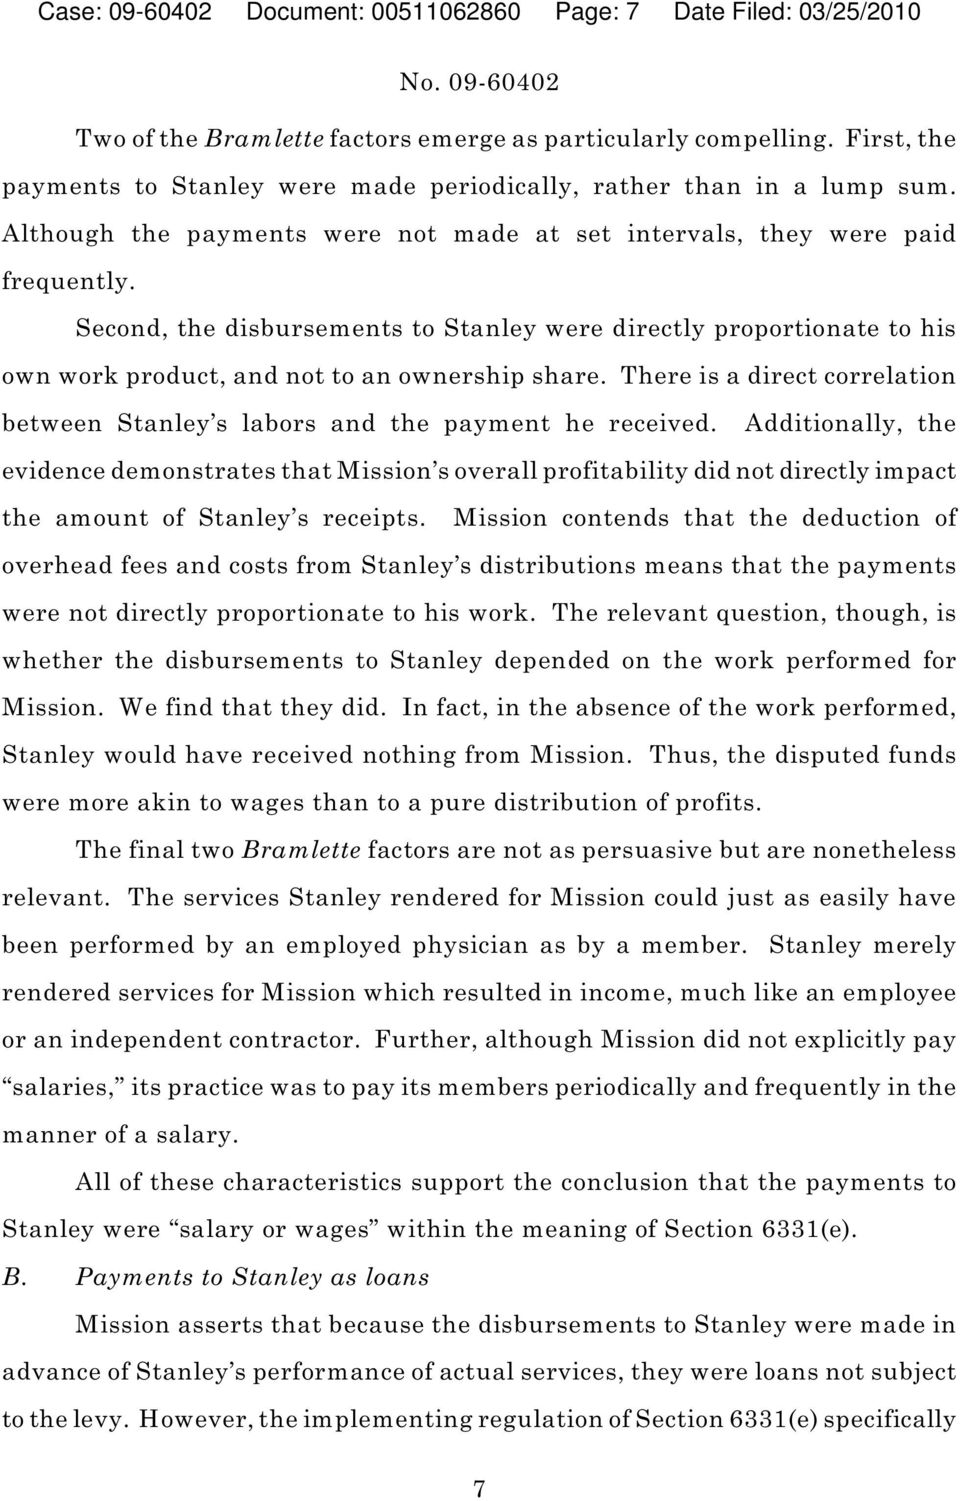 Second, the disbursements to Stanley were directly proportionate to his own work product, and not to an ownership share.